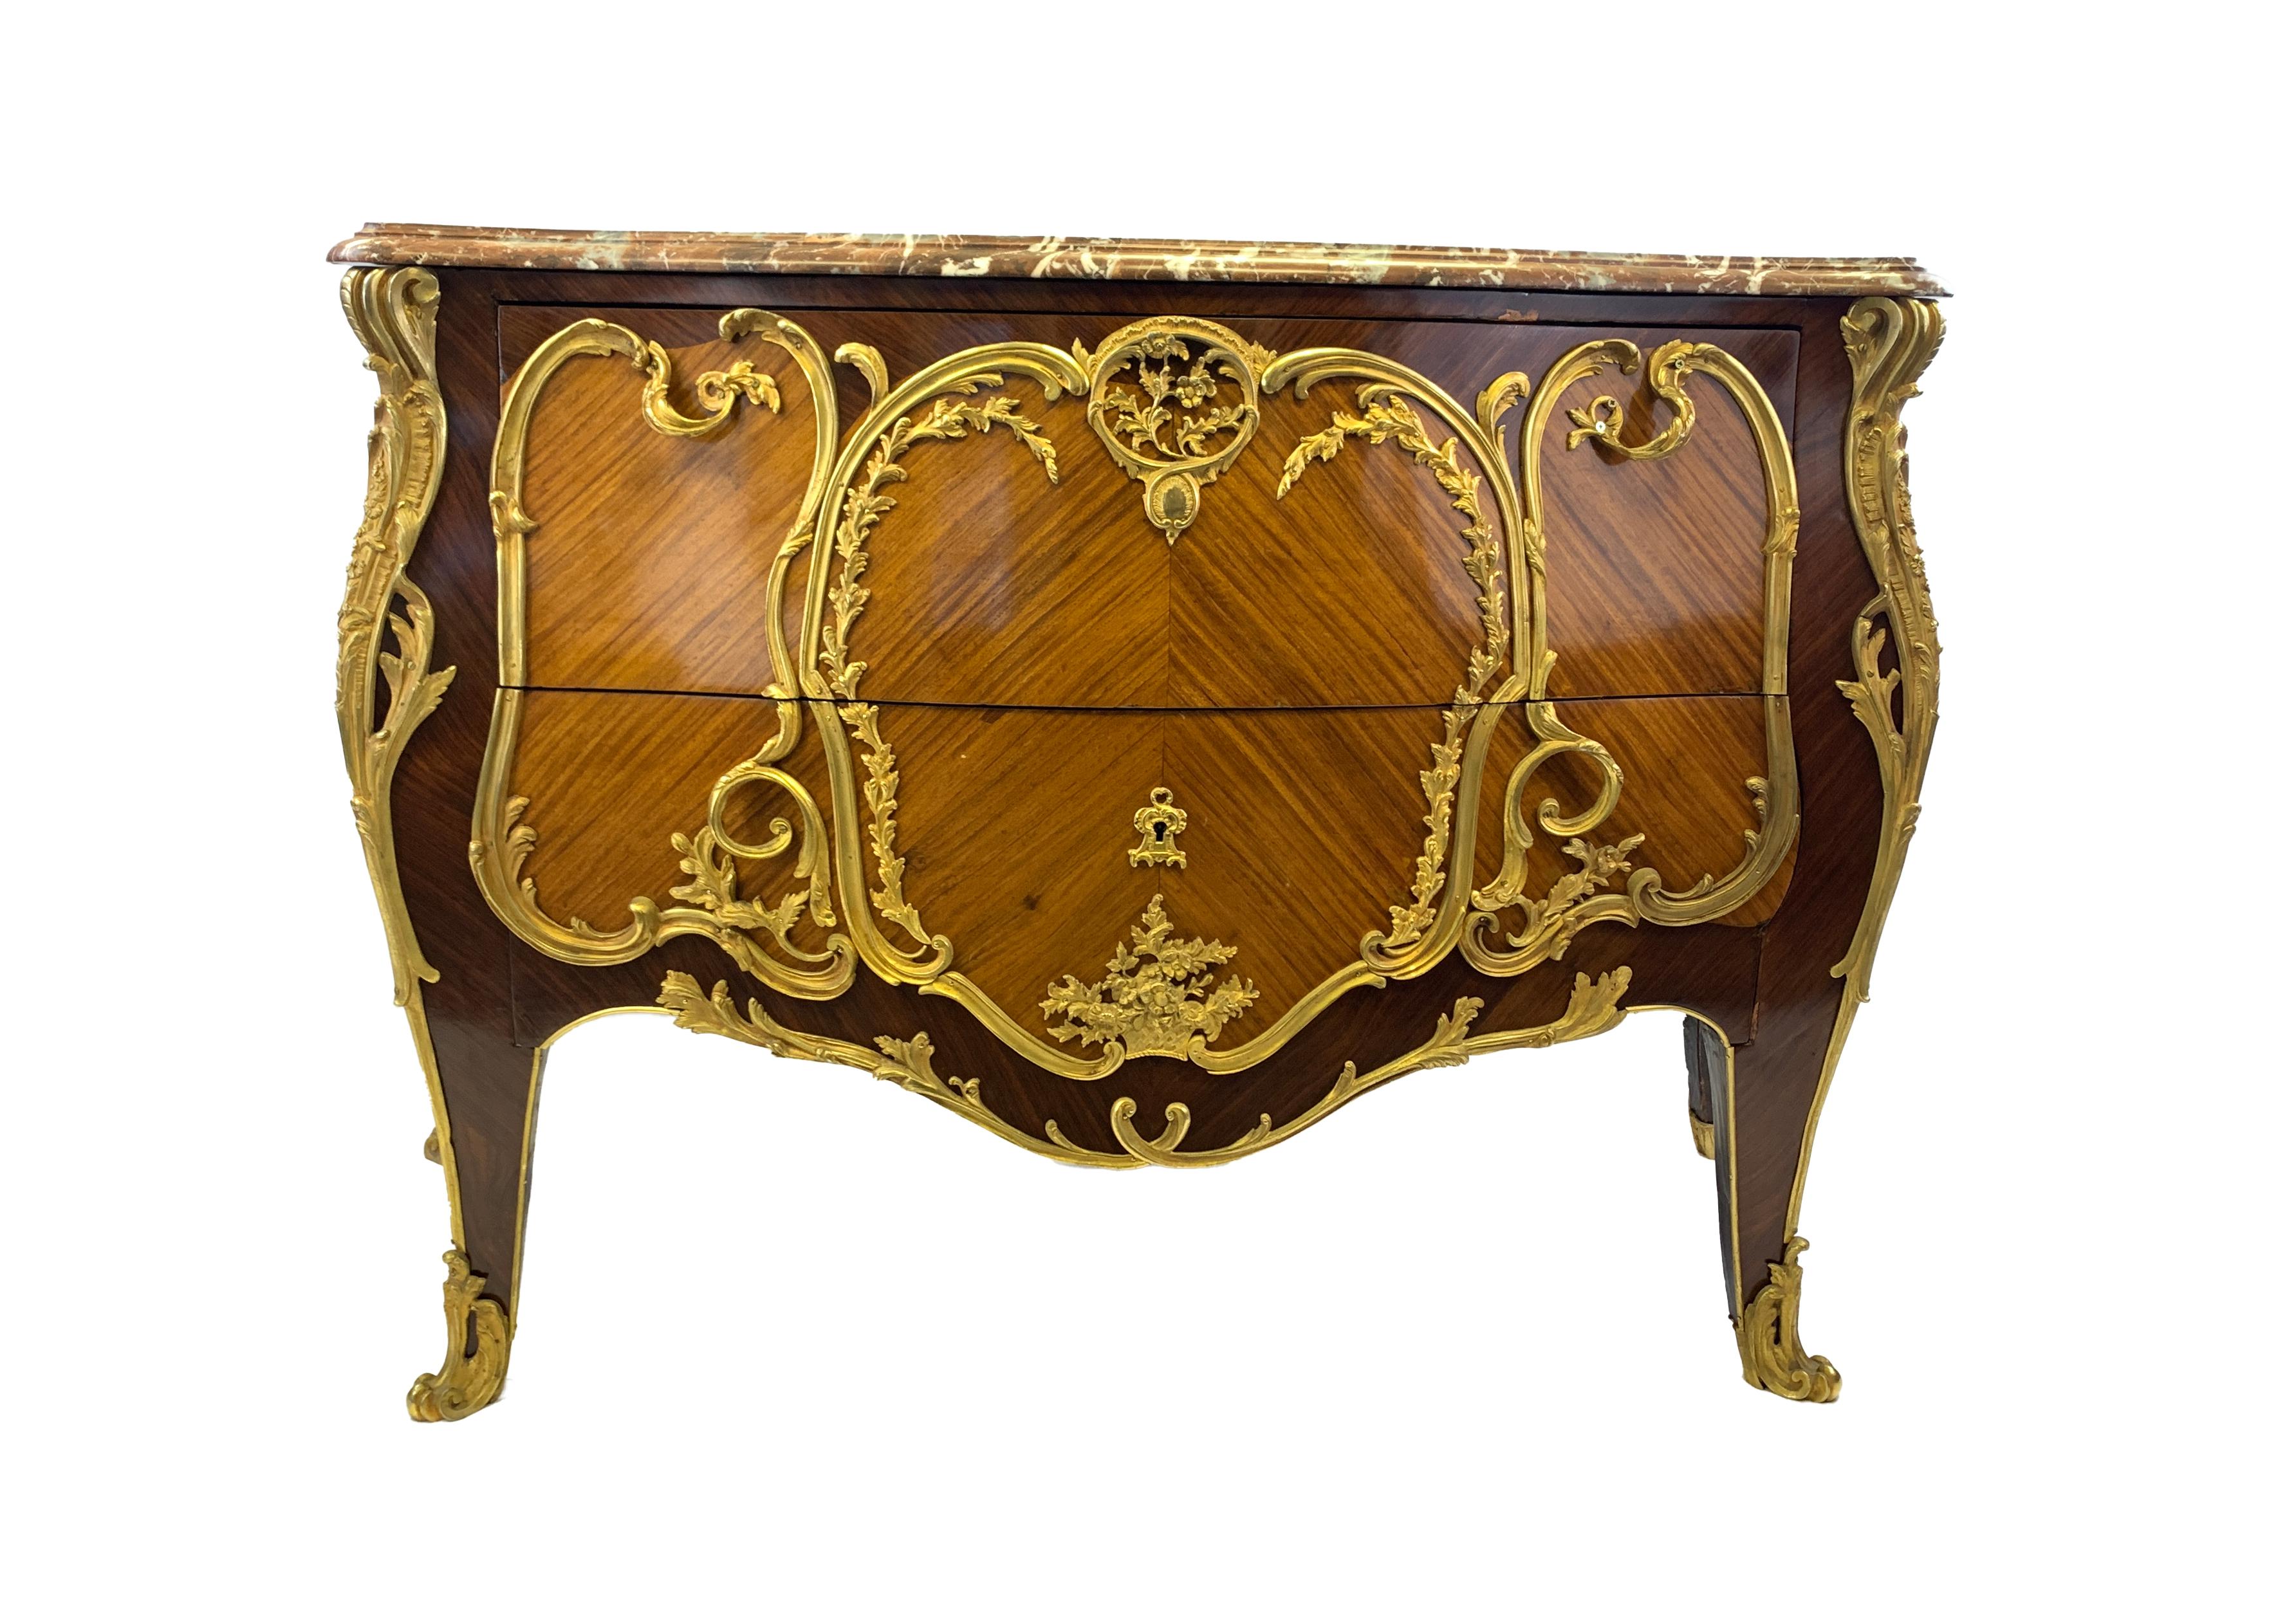 Late 19th Century, shaped marble top with moulded edge on bombe shaped commode with two long drawers, ormolu mounts and handles, resting on cabriole legs mounted with ormolu acanthus leaf feet.
 